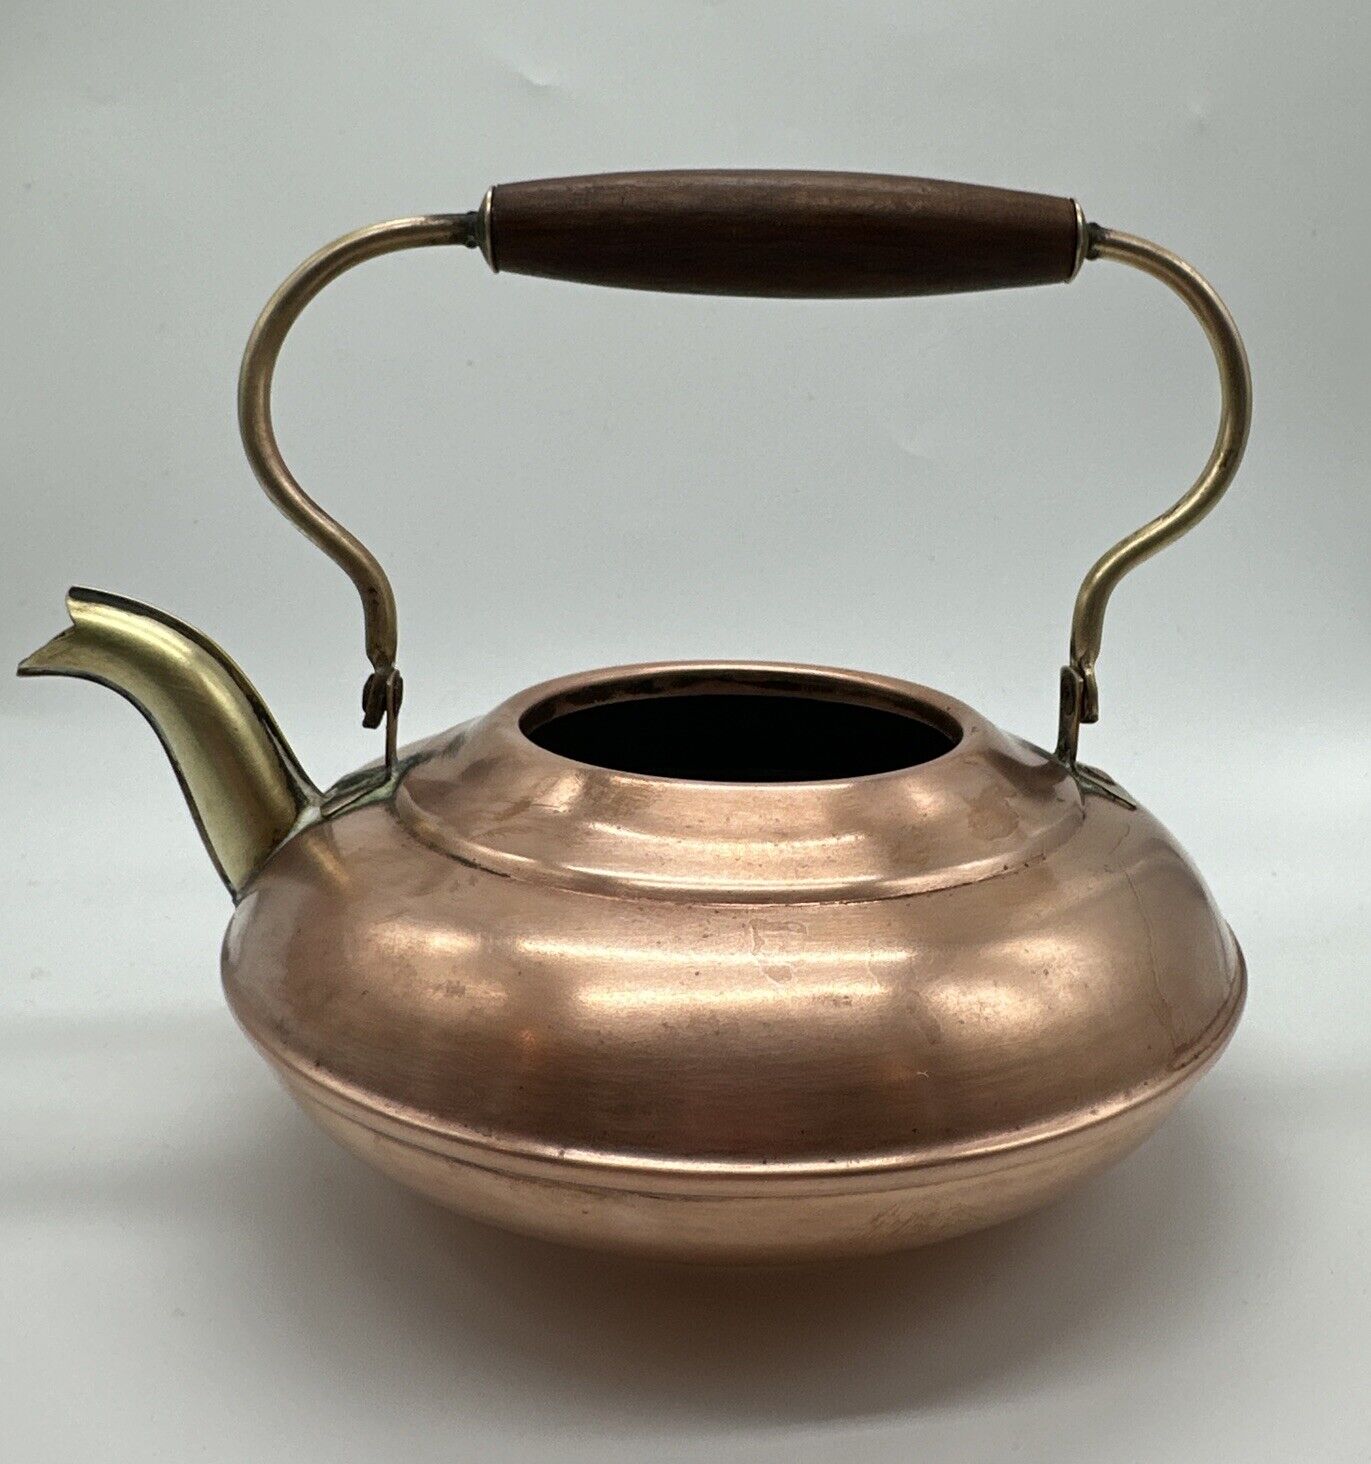 Vintage Two-Toned Copper/Brass Kettle With Wooden Handle No Lid Made in Holland